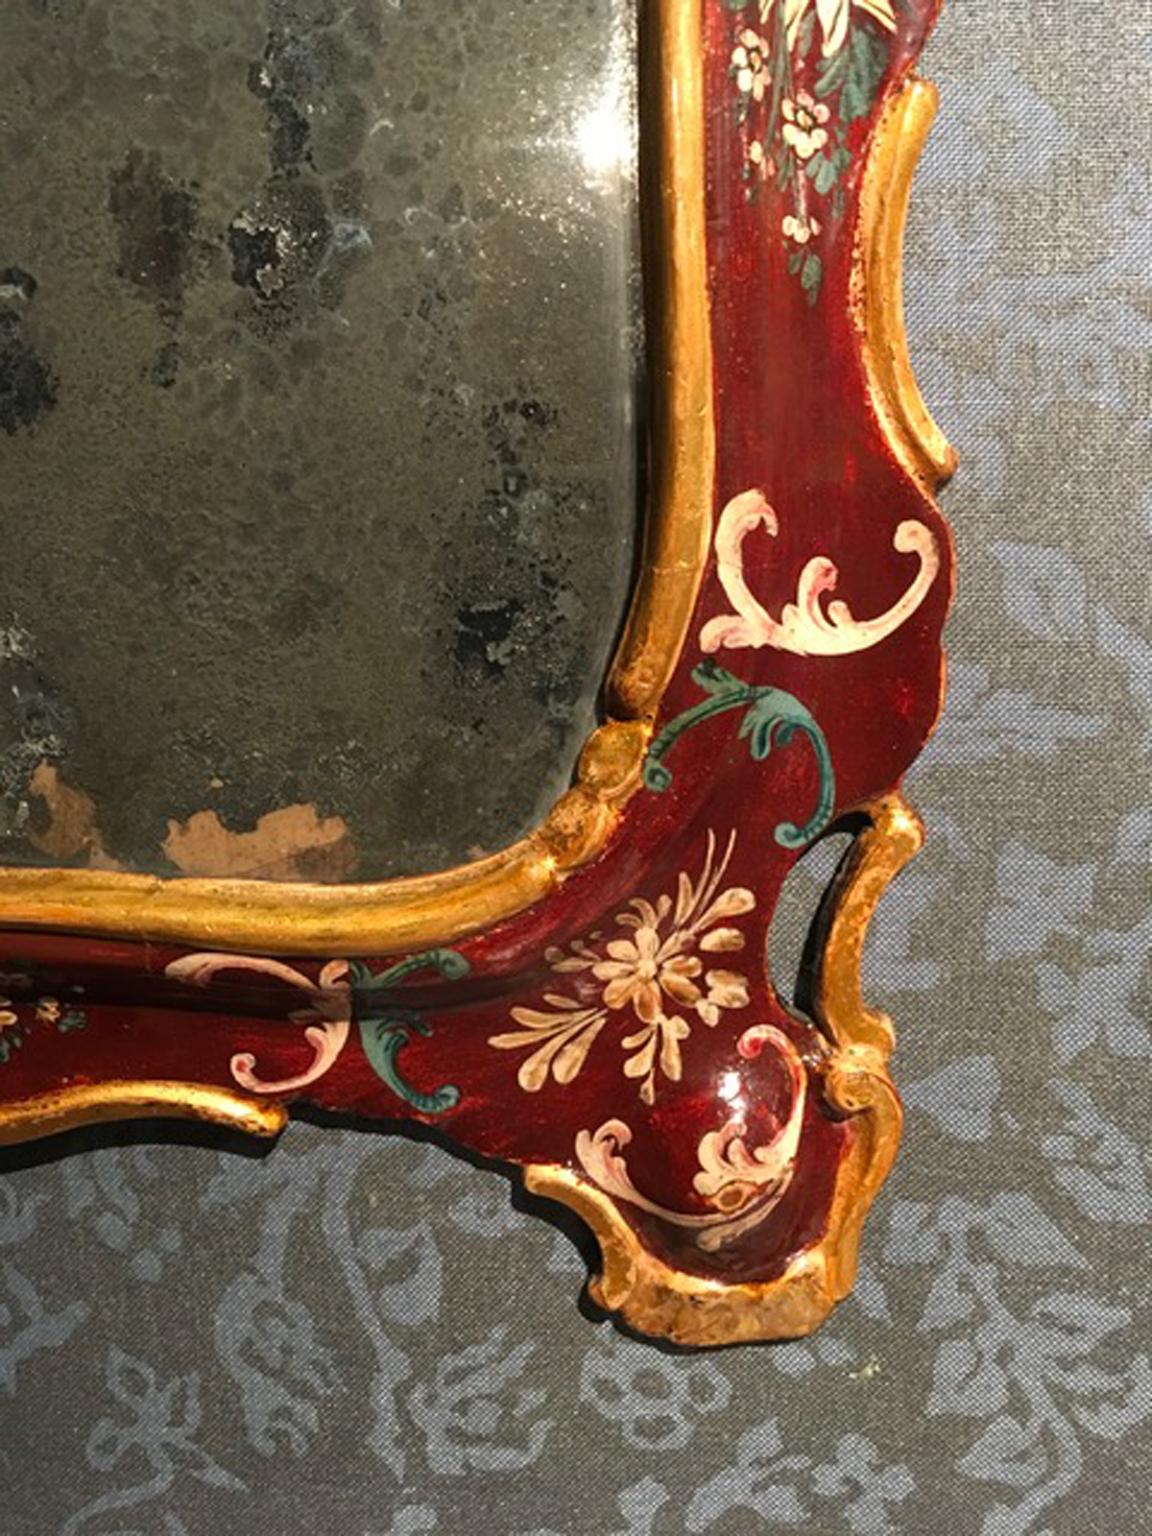 This is a very fine handmade baroque wooden mirror, with the original mercury glass. The wooden frame is hand painted with elegant flowers drawings and a golden border. A perfect piece to furnish an elegant entry hall.

A very decorative piece and a